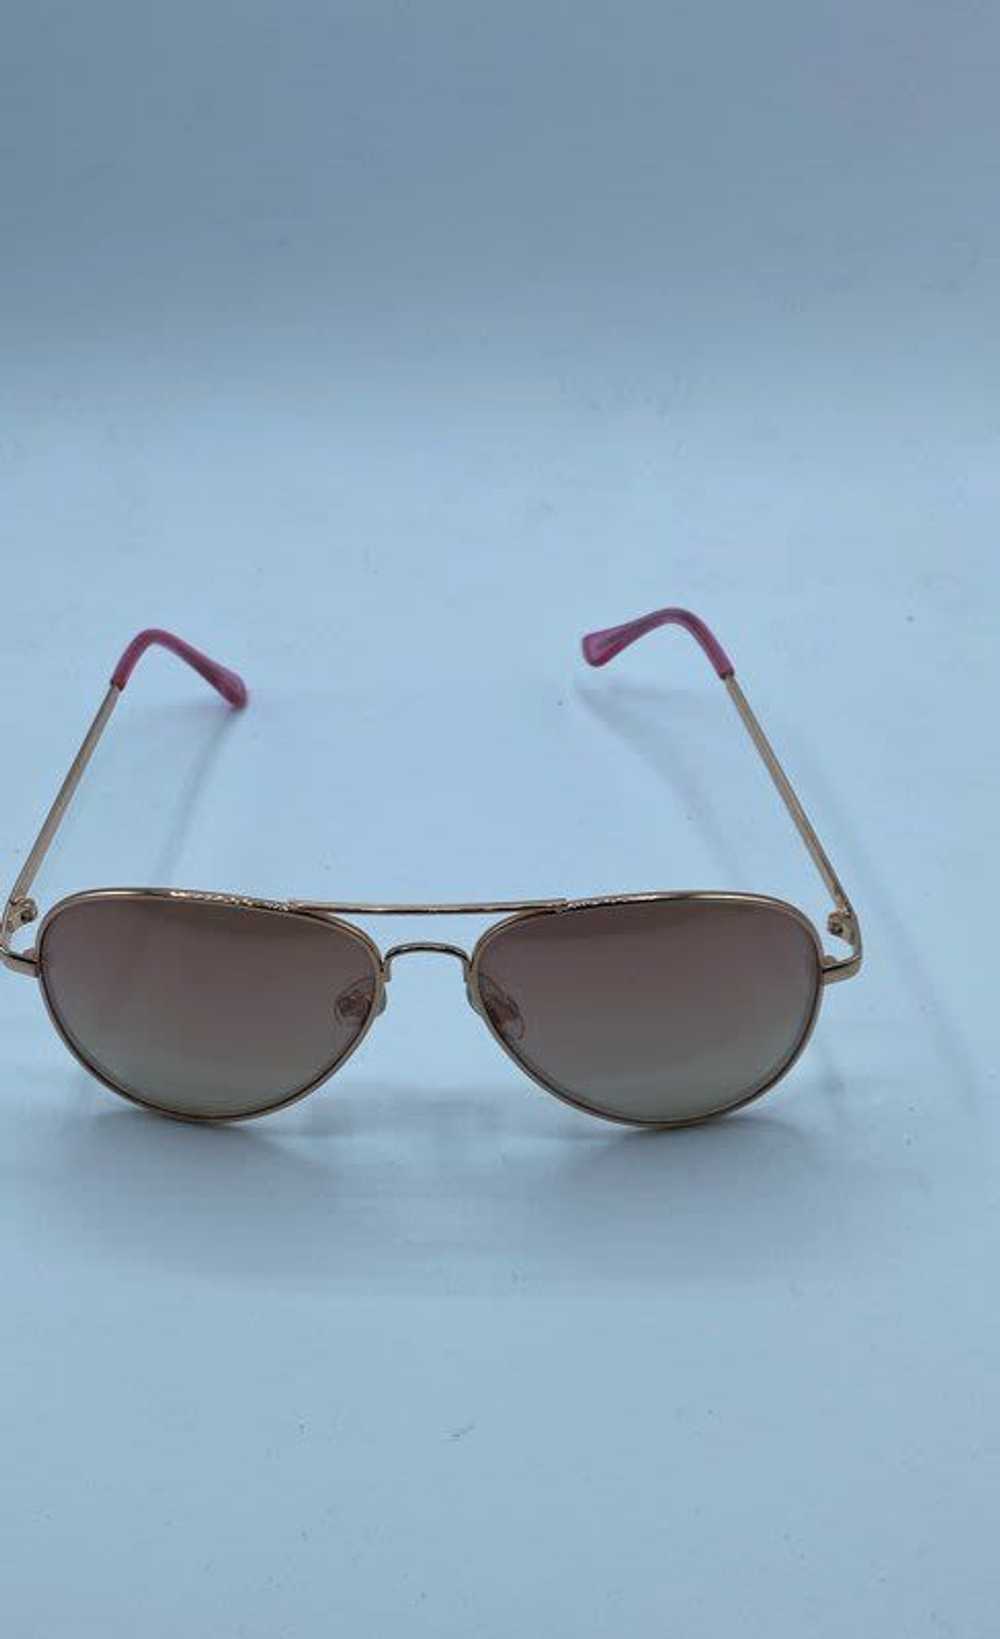 Unbranded Pink Sunglasses - 3 Pairs No Case - image 4